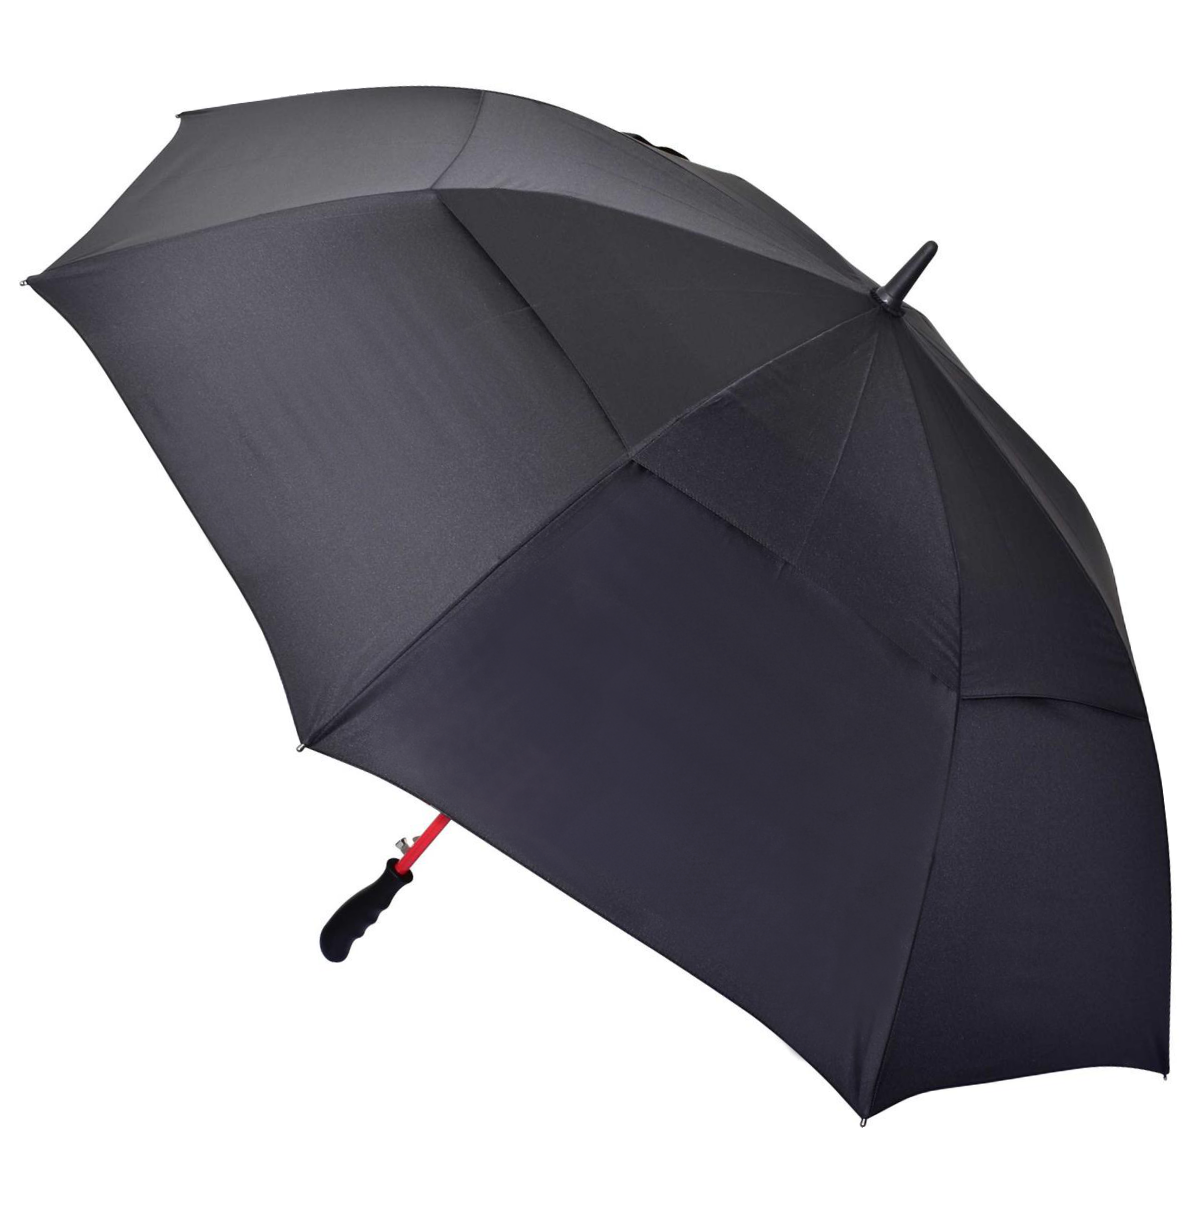 CUSTOM BRANDED - STORMPROOF CYCLONE®️ - Heavy Duty Storm Umbrella With Double Layer Wind Vent System, Wind Proof Fibreglass Frame - Auto-Open Push Button Feature